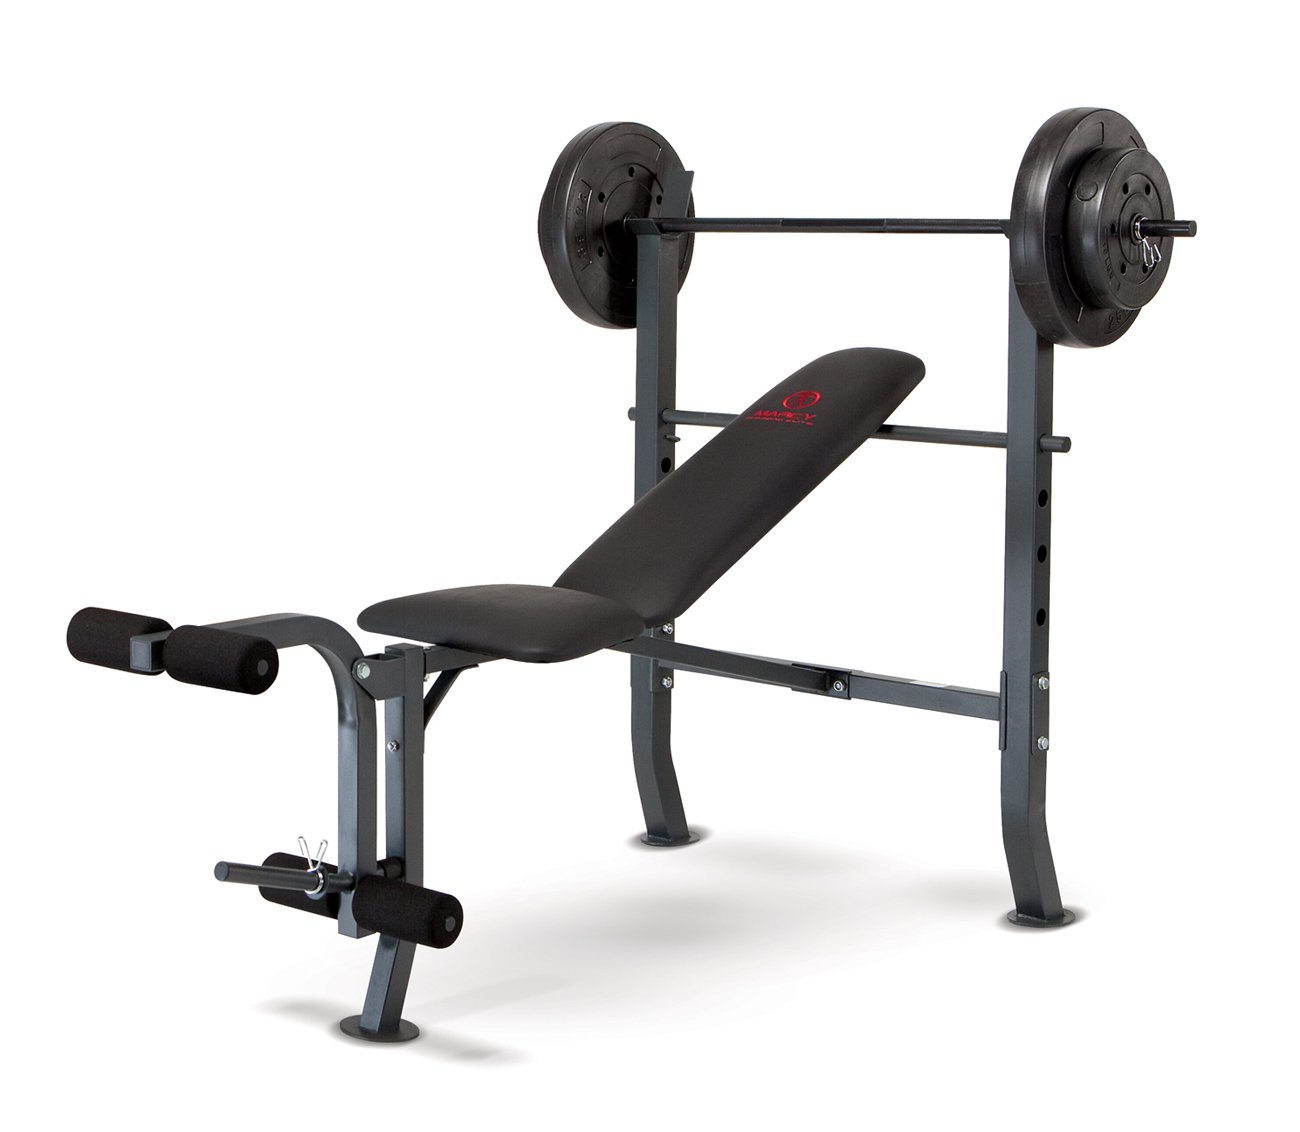 Marcy Standard Bench with 80 lb Weight Set Home Gym Workout Equipment - image 2 of 5